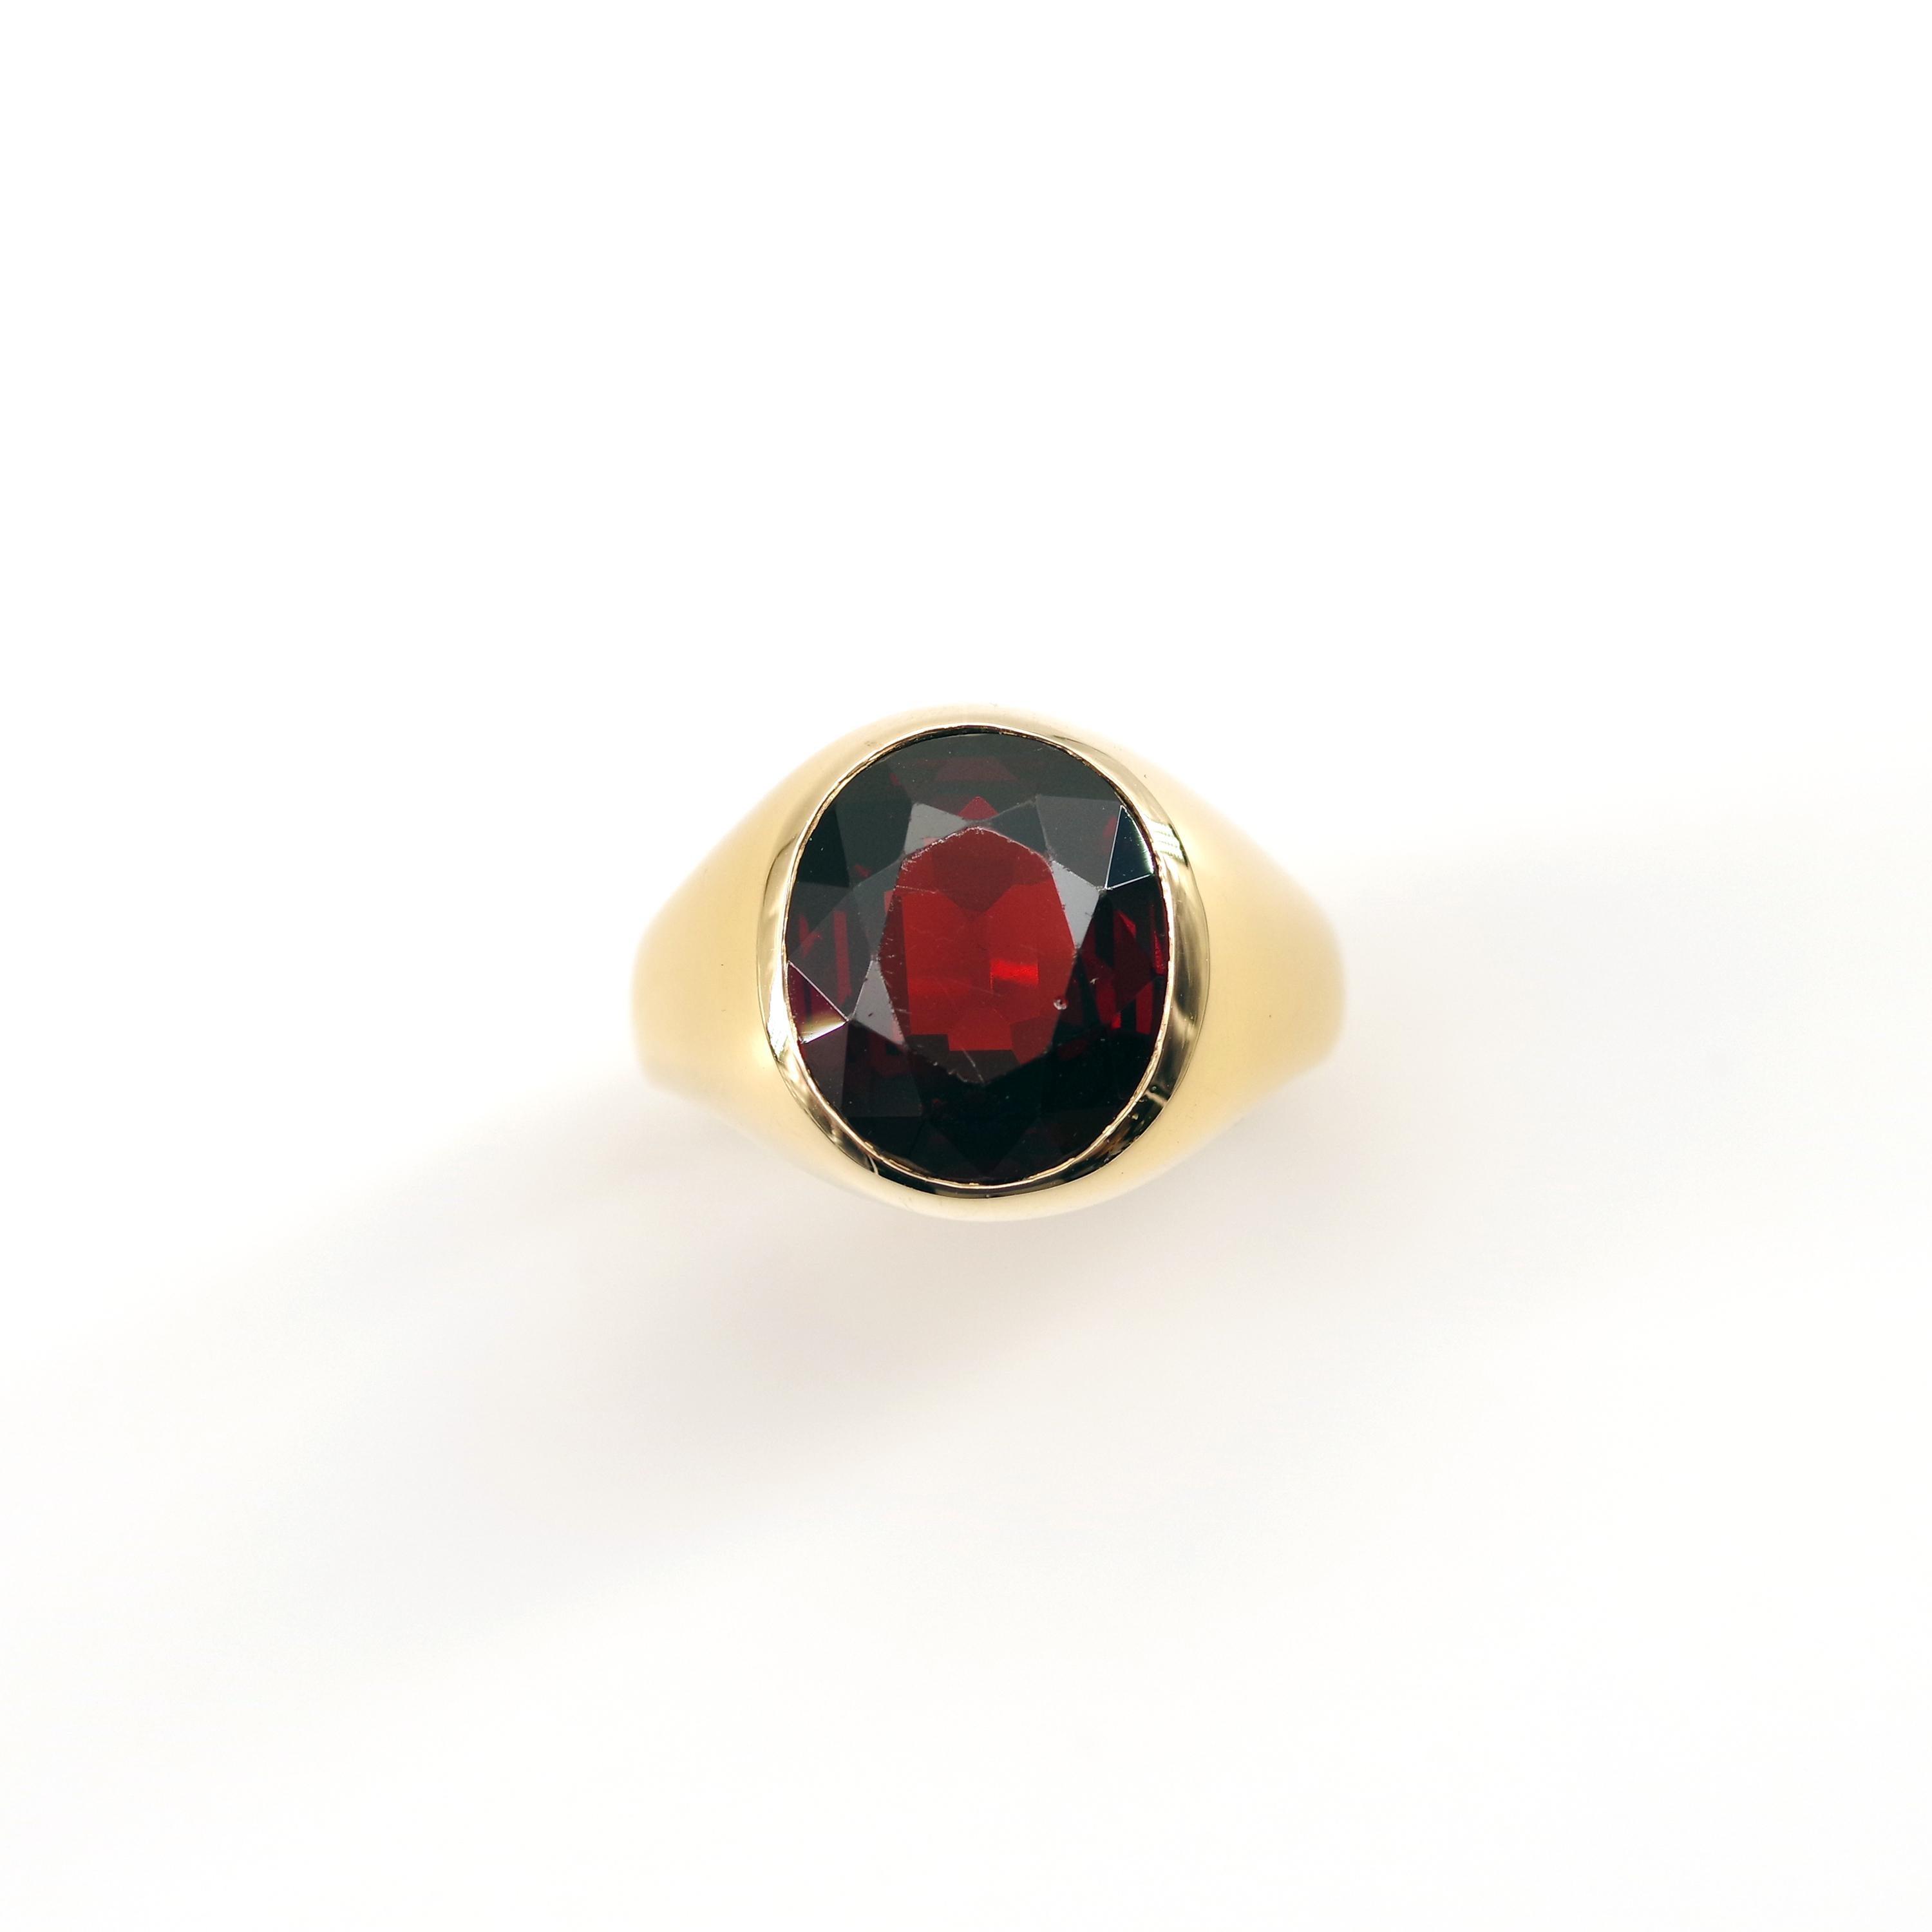 As you go about your day at the office or on the road, the large (approx. 7.5 carat) garnet in this ring is dark, could even pass for black. But facets reflect the light as you move, creating sharp white geometric play across the surface of the